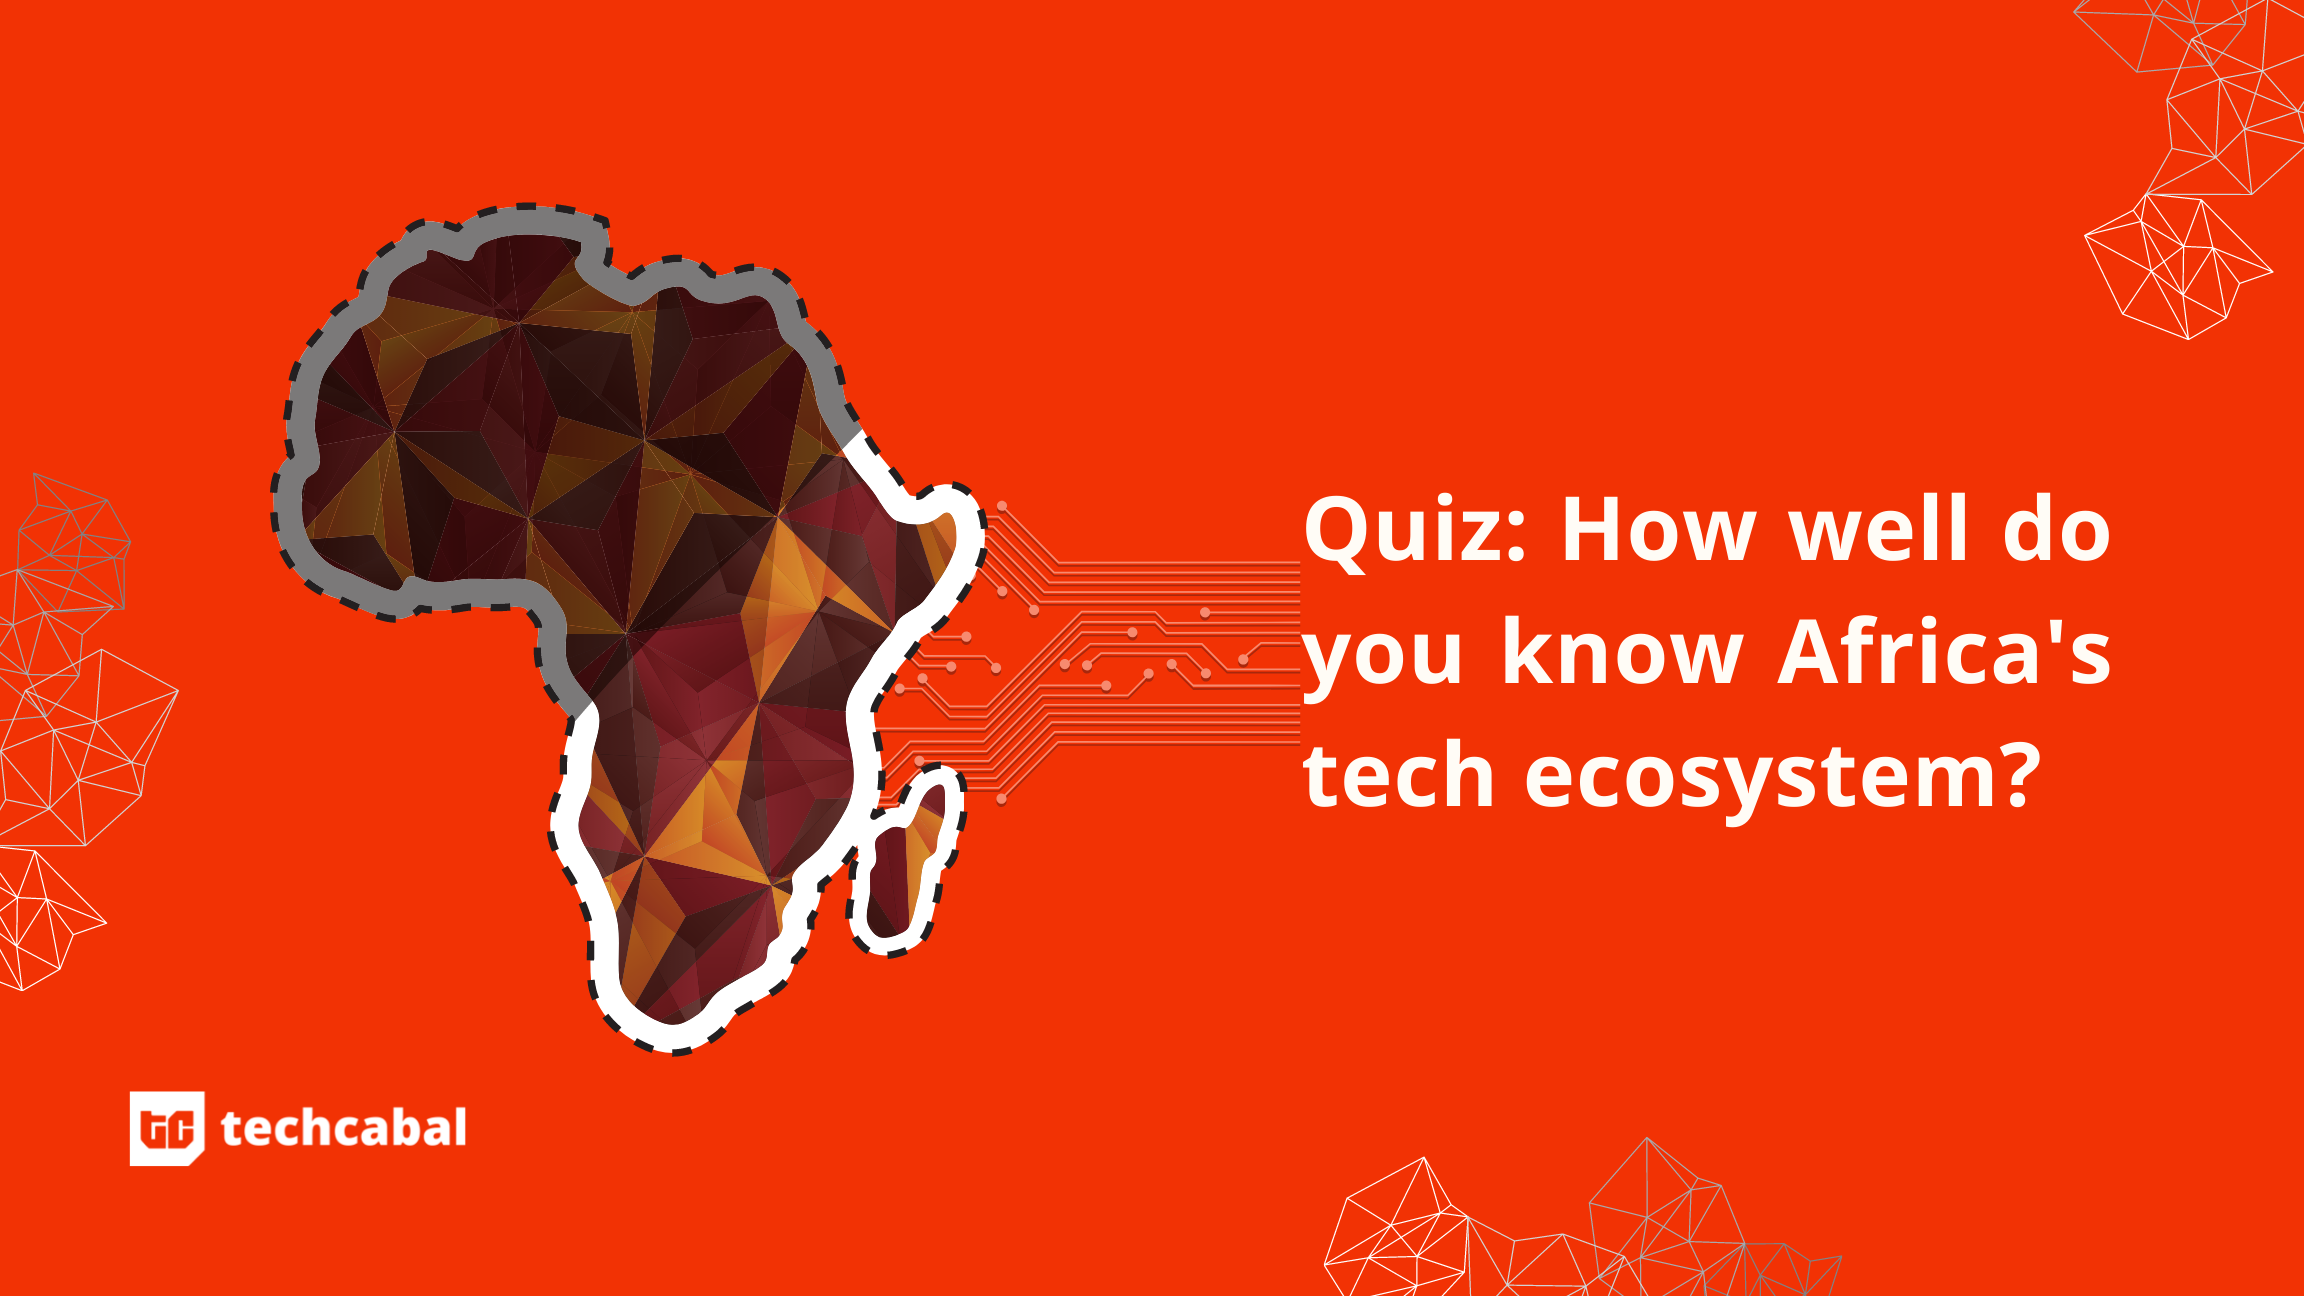 How well do you know Africa's tech ecosystem?